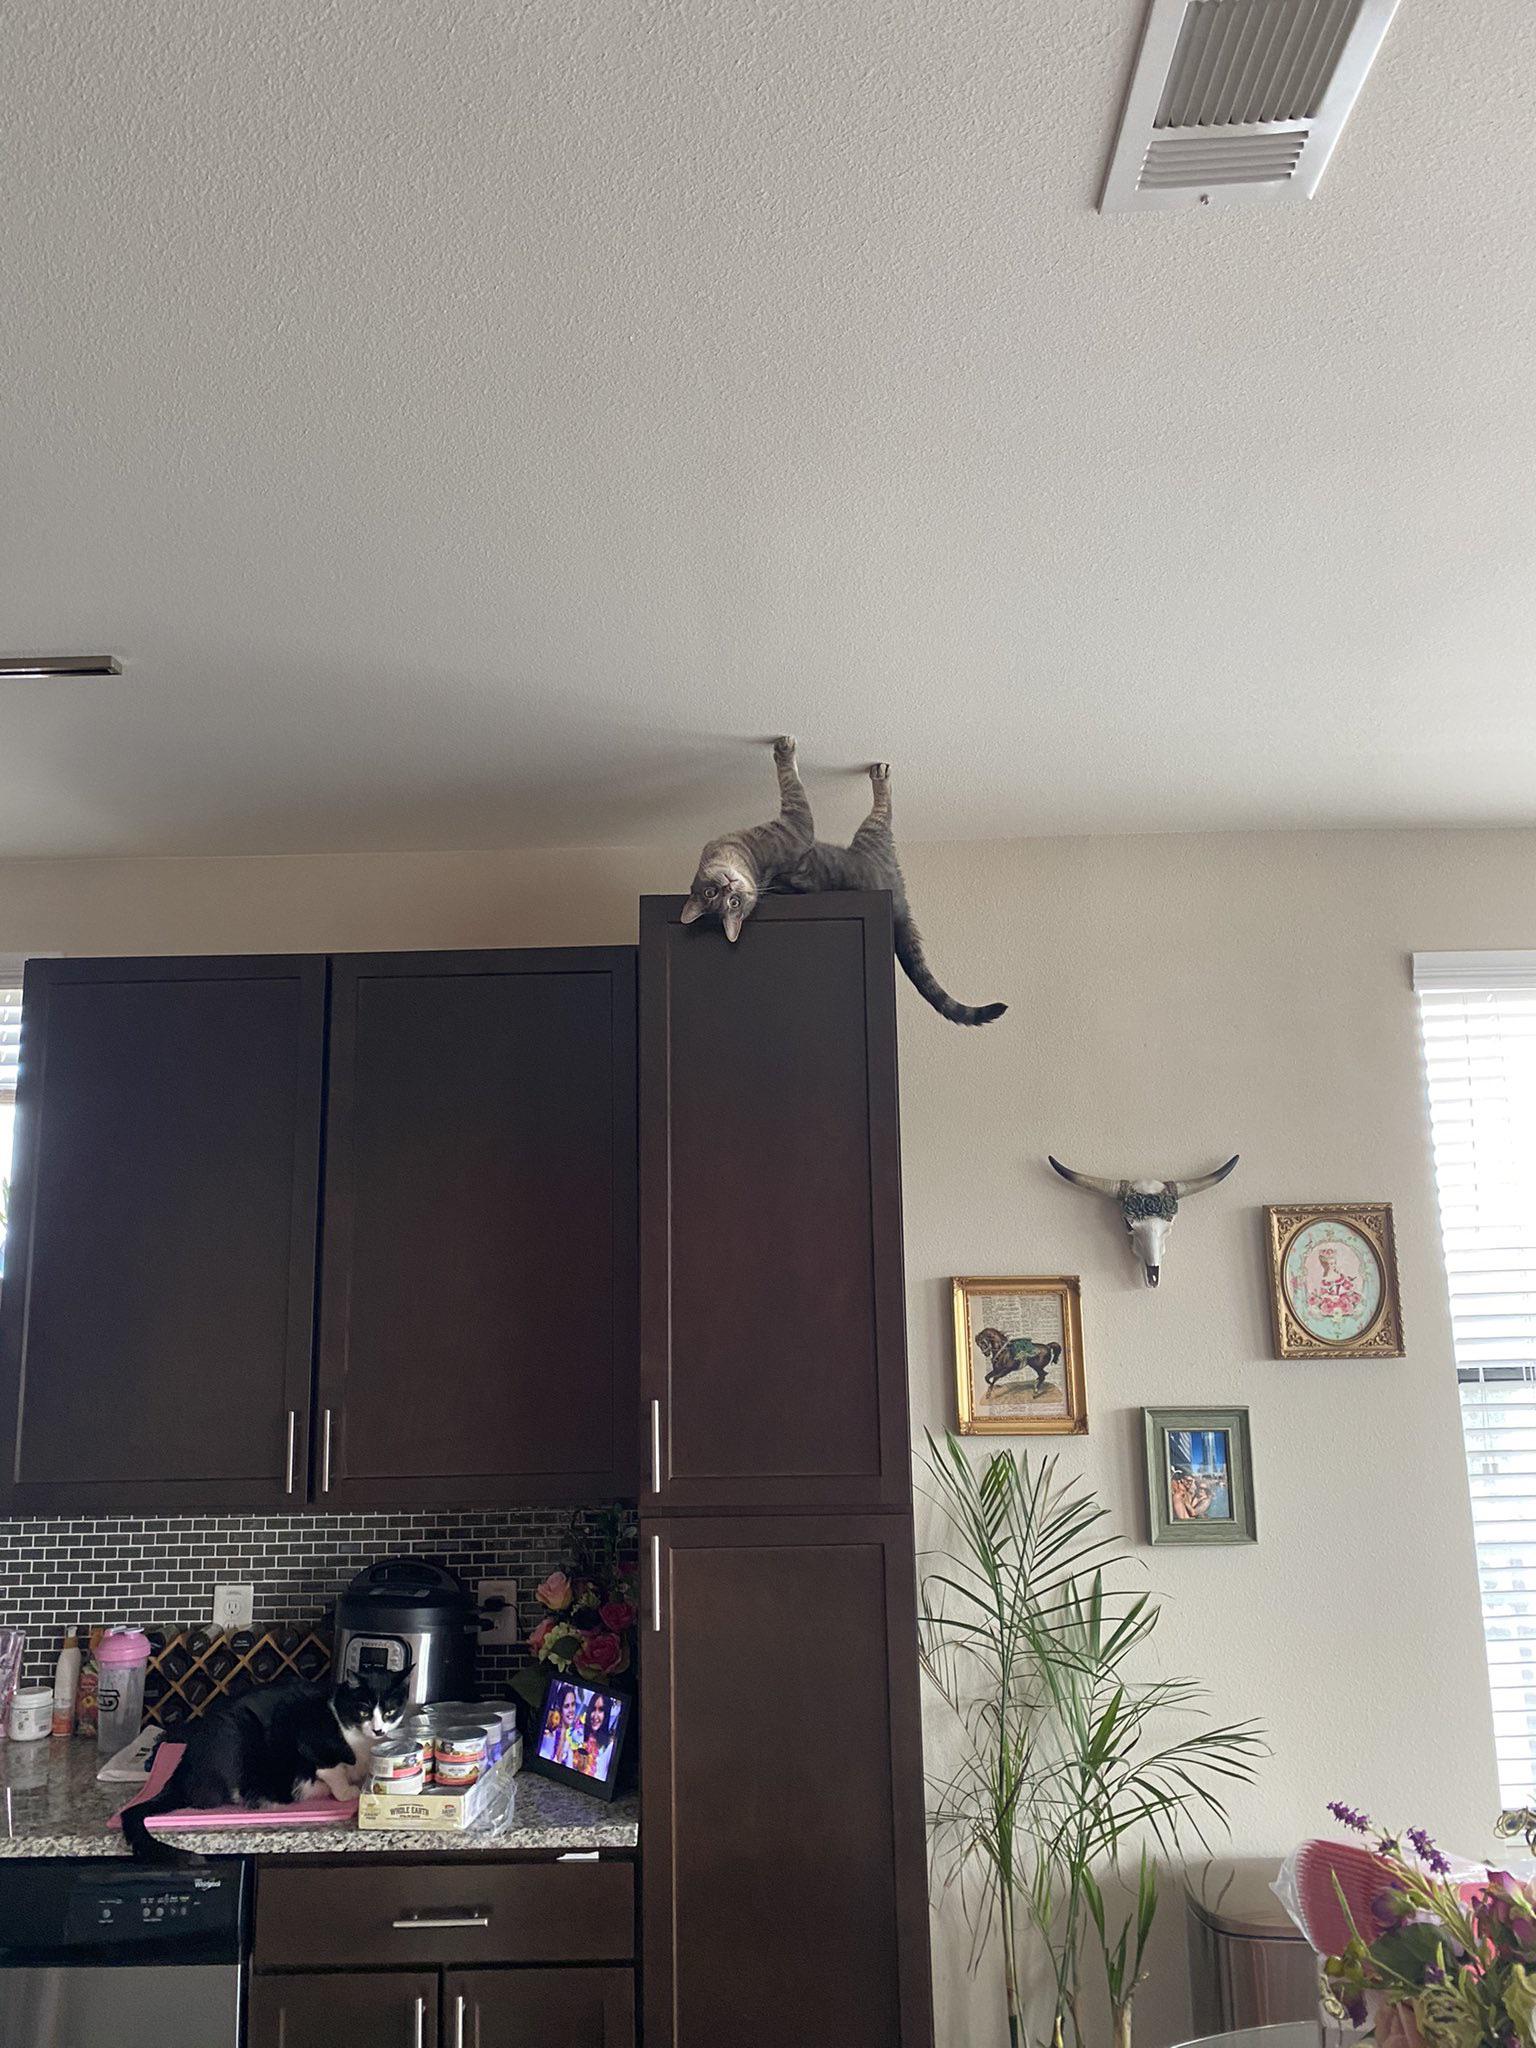 cat upside down on top of kitchen cabinet with another cat on counter